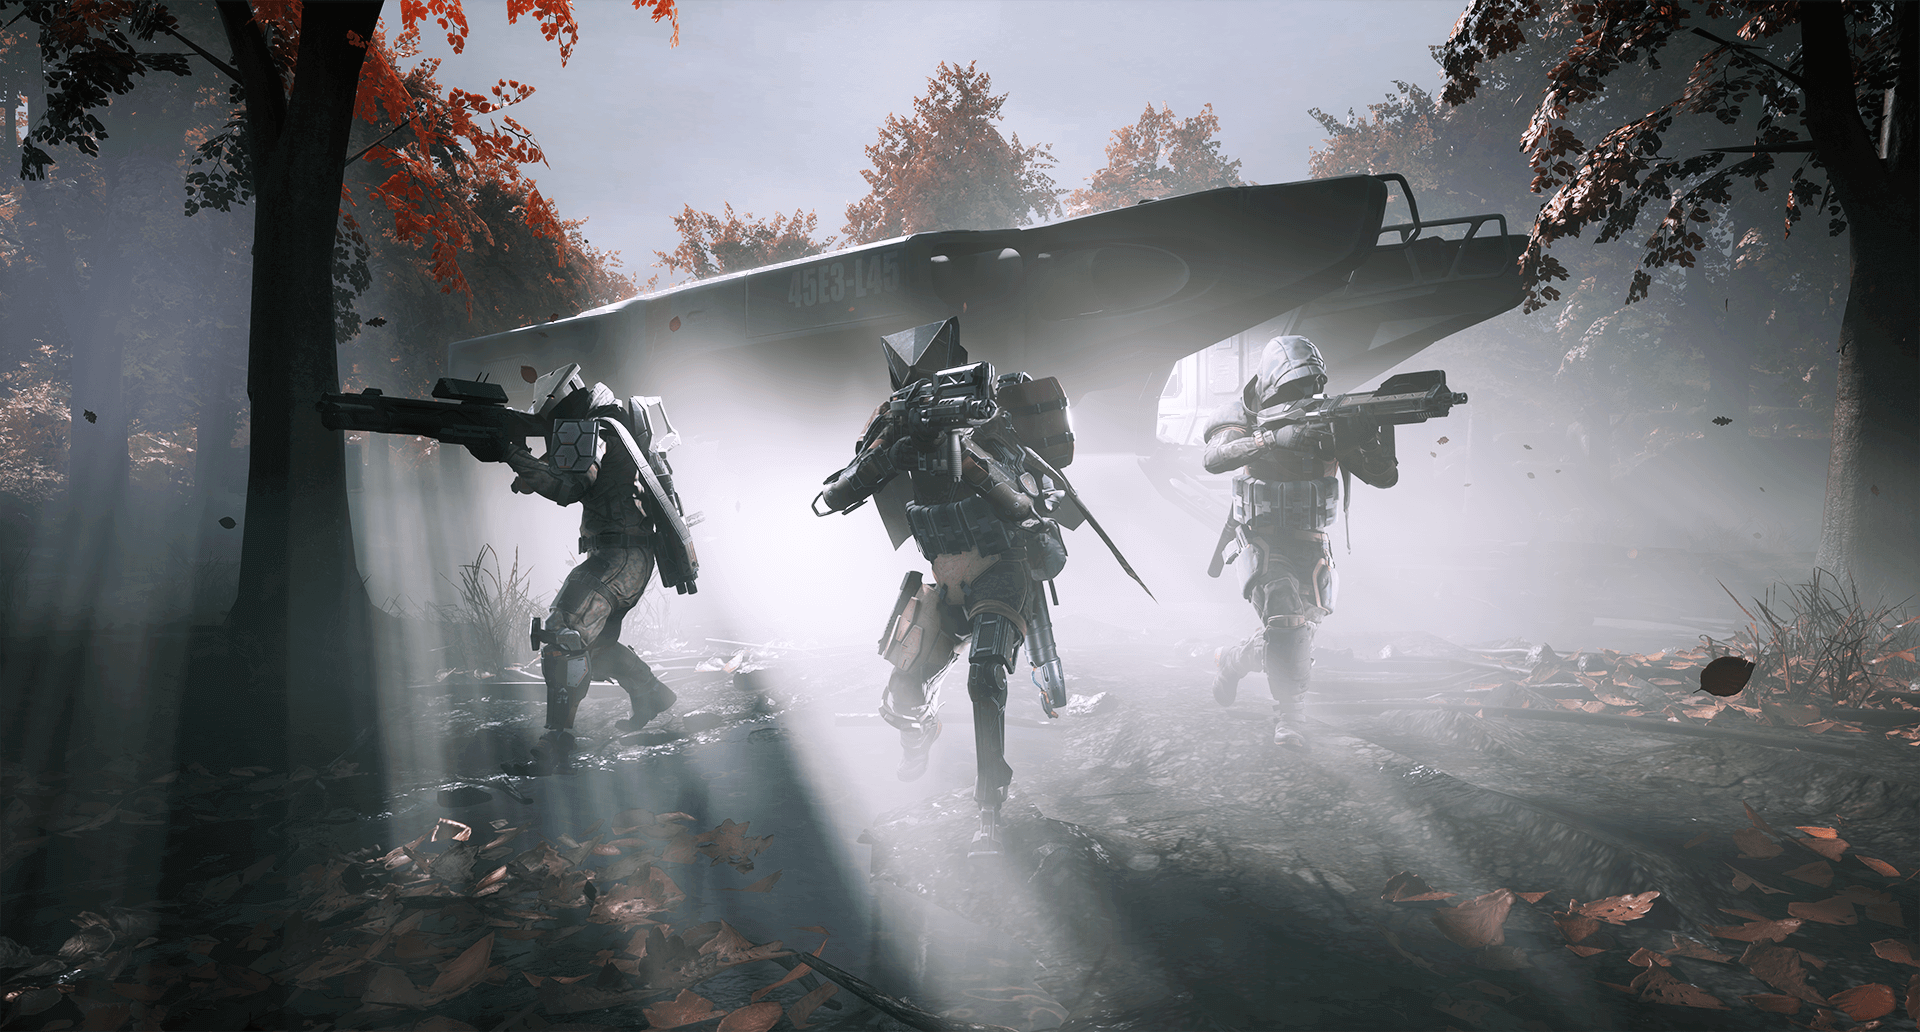 The makers of Mutant Year Zero surprise us again with another tactical strategy game